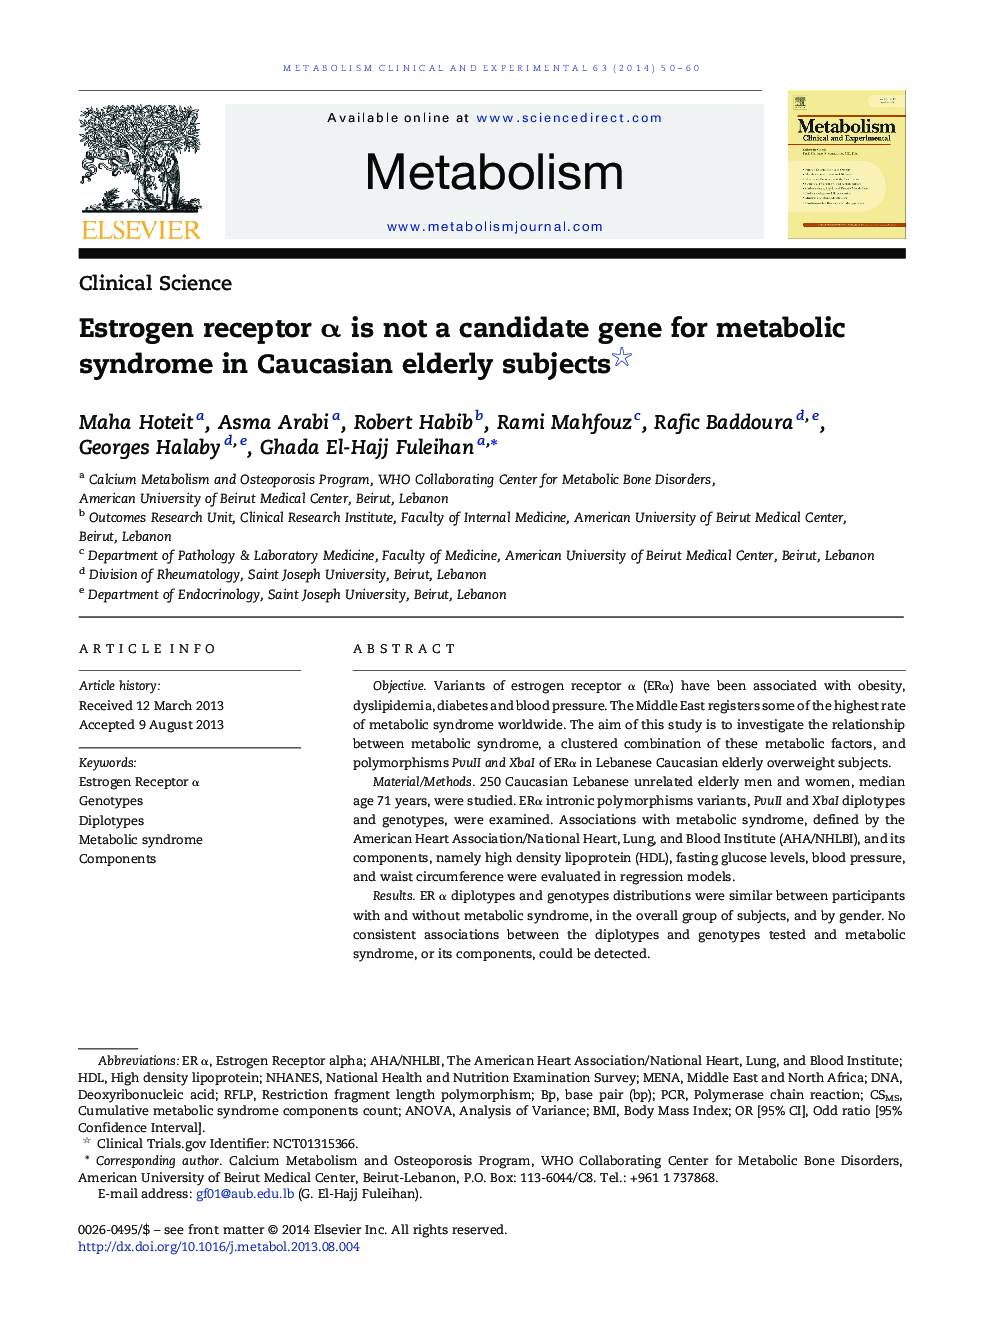 Estrogen receptor α is not a candidate gene for metabolic syndrome in Caucasian elderly subjects 